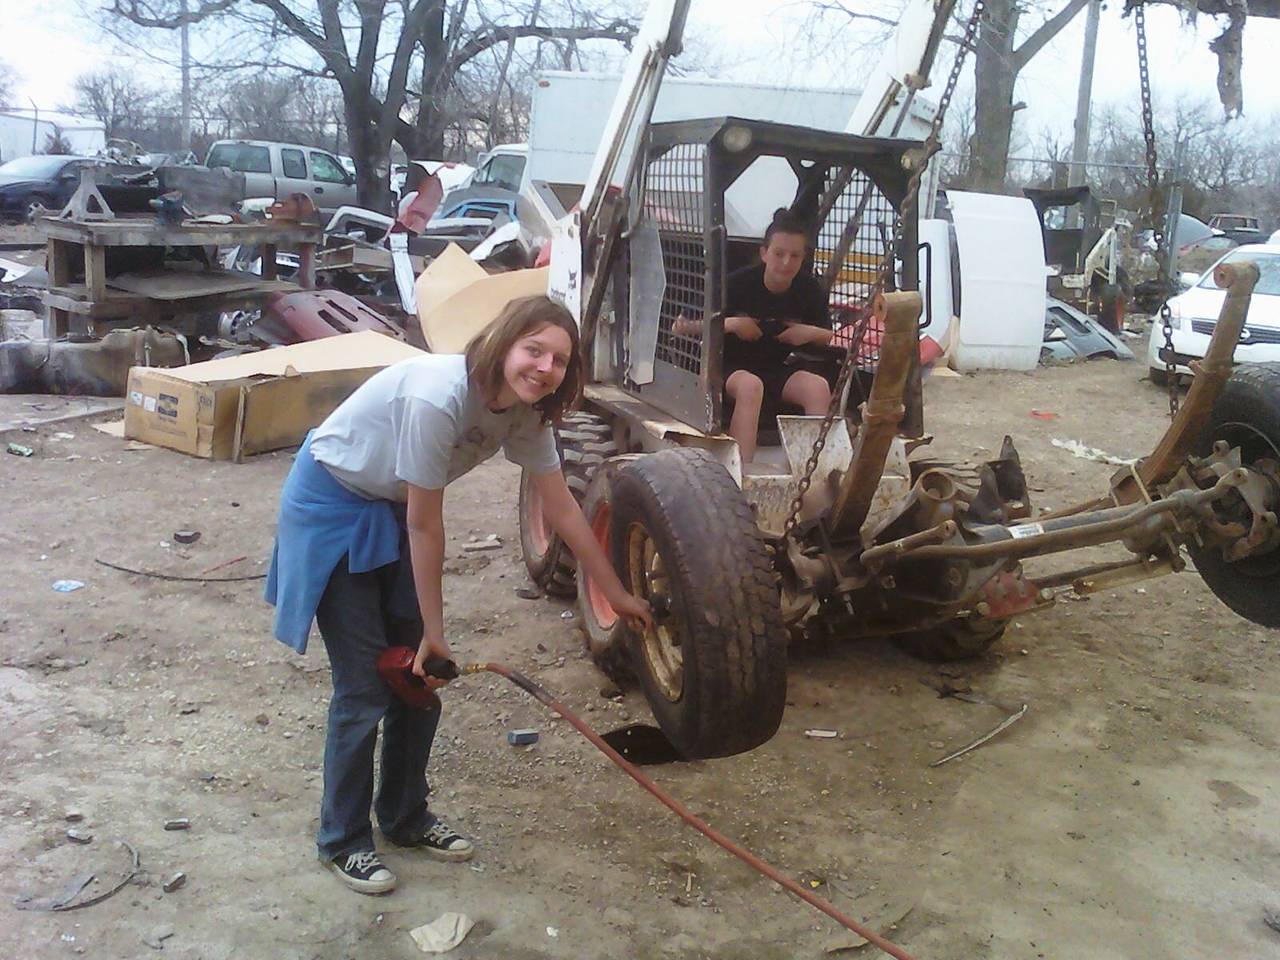 Lauryn in the Bobcat and Andi putting the wheels back on.